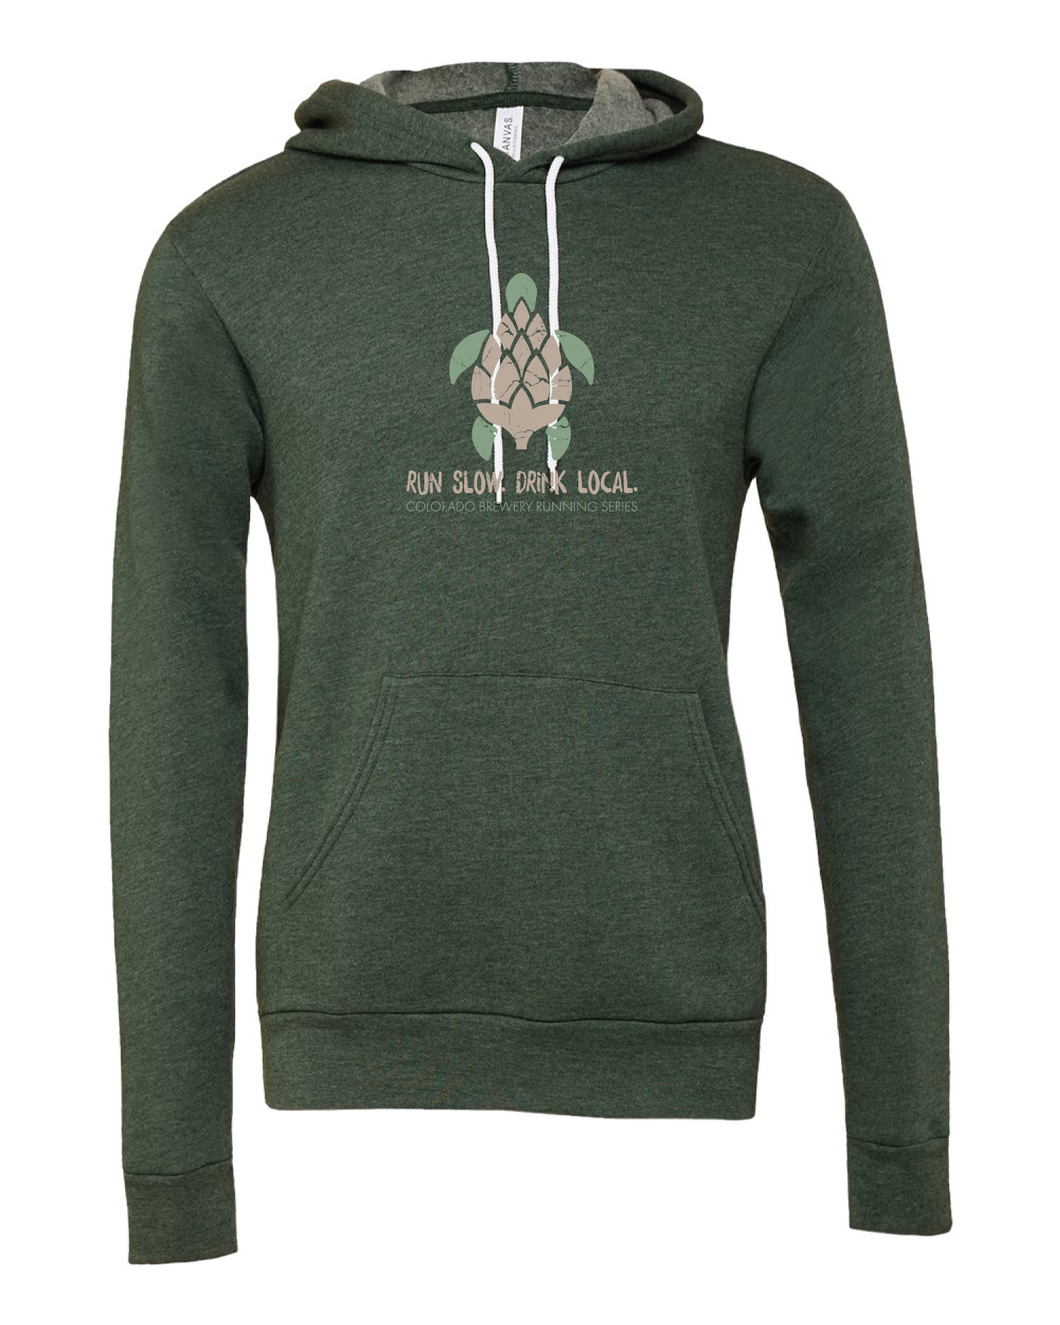 Run Slow. Drink Local.  - Hoodie - Heather Forest